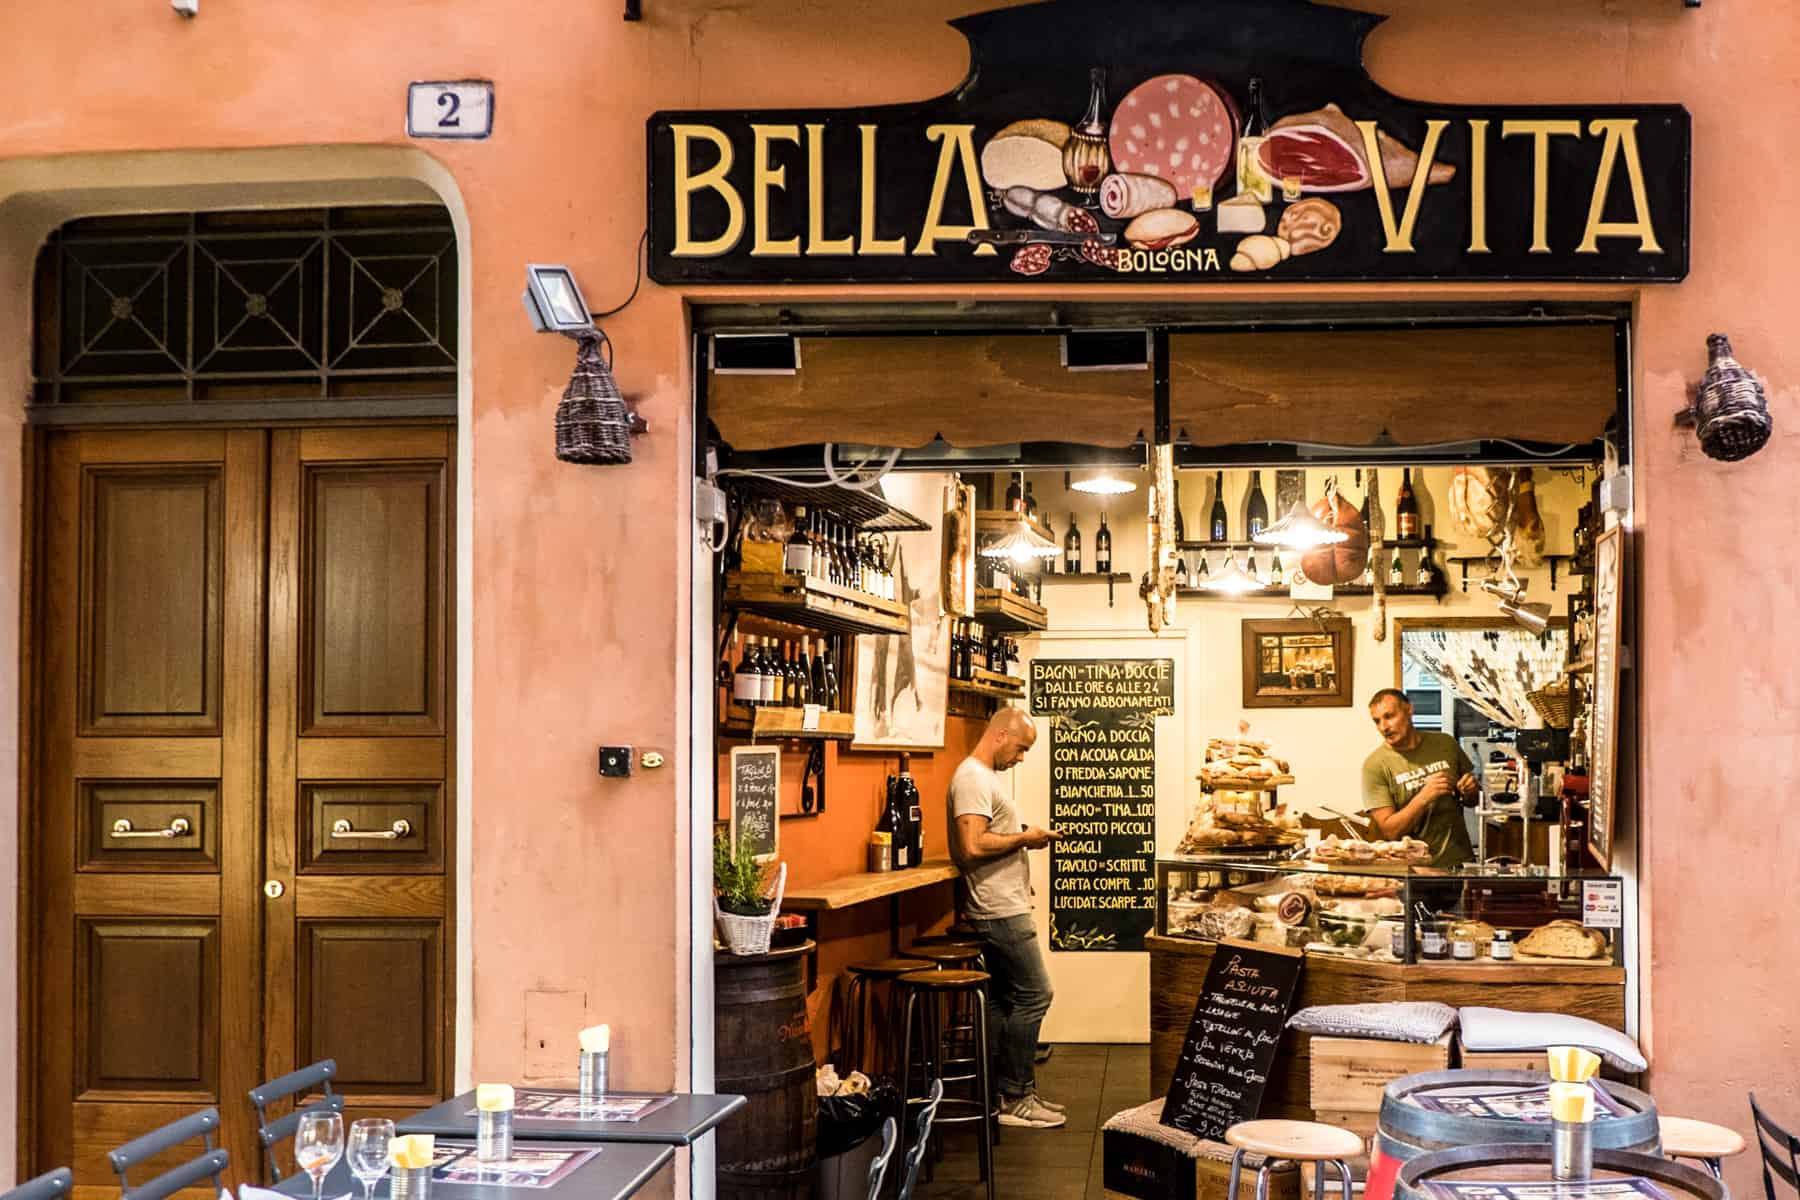 Two men in a small bar in Bologna. The sign says "Bella Vita" with pictures of meet, cheeses and breads. Tables and chairs stand outside the bar. 